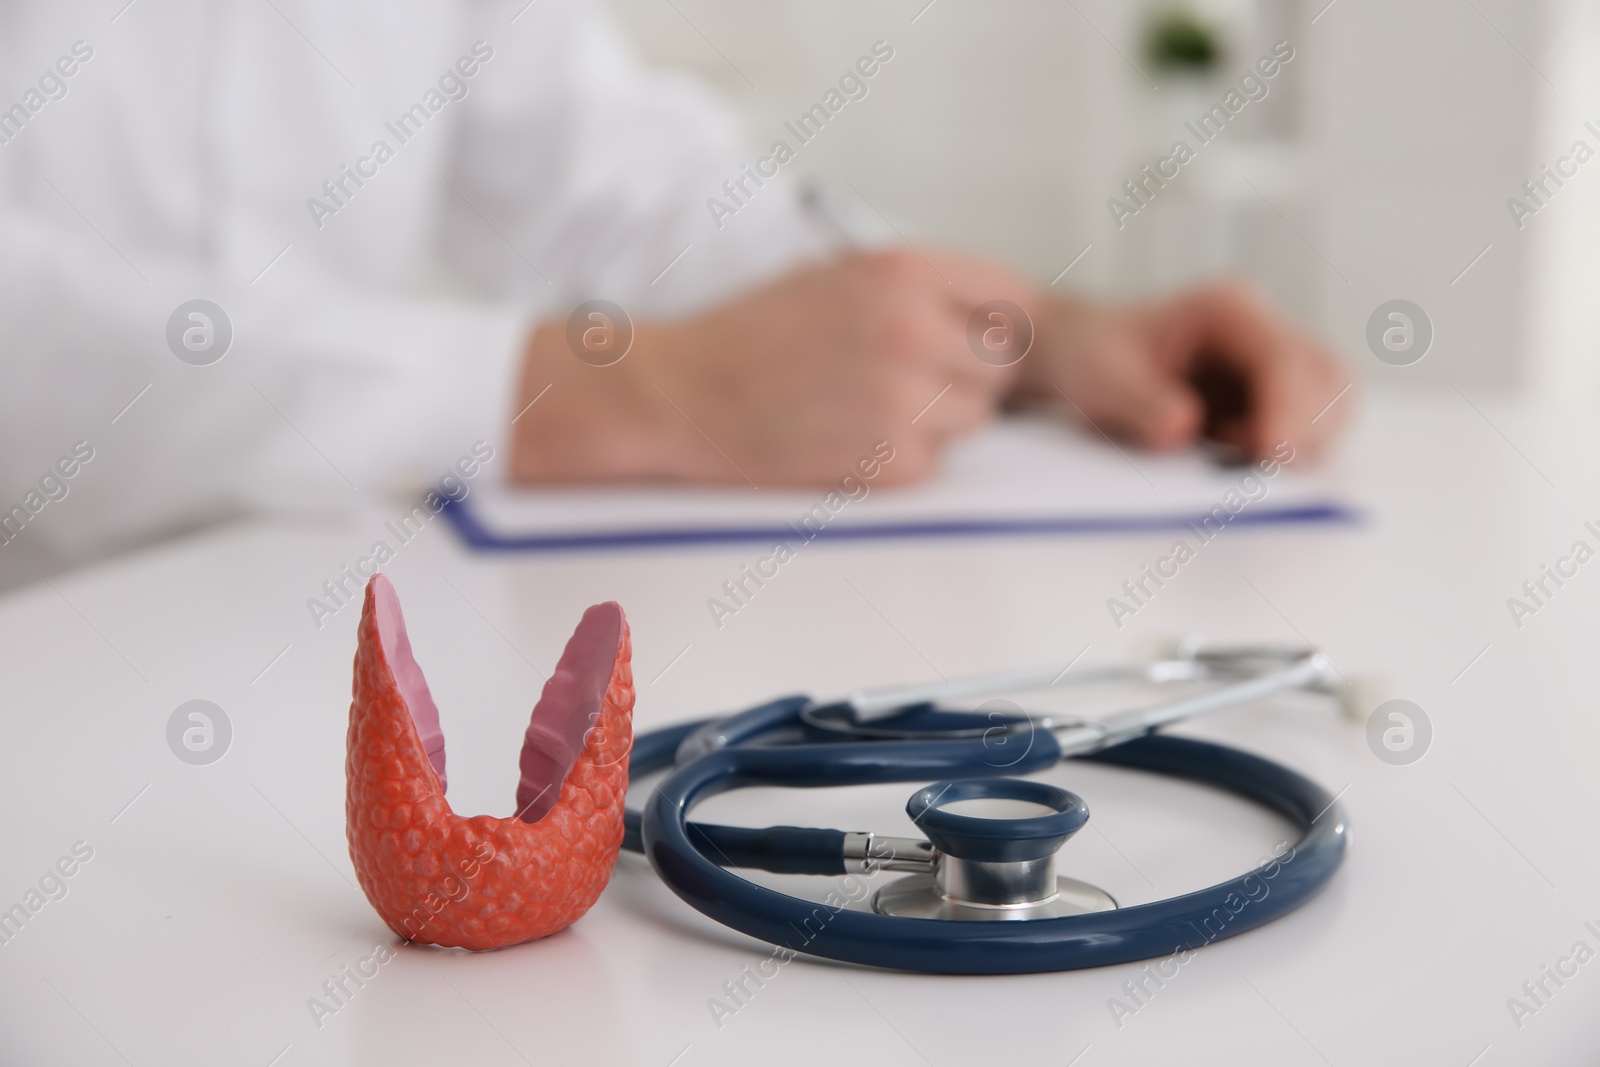 Photo of Thyroid gland model and stethoscope on table indoors